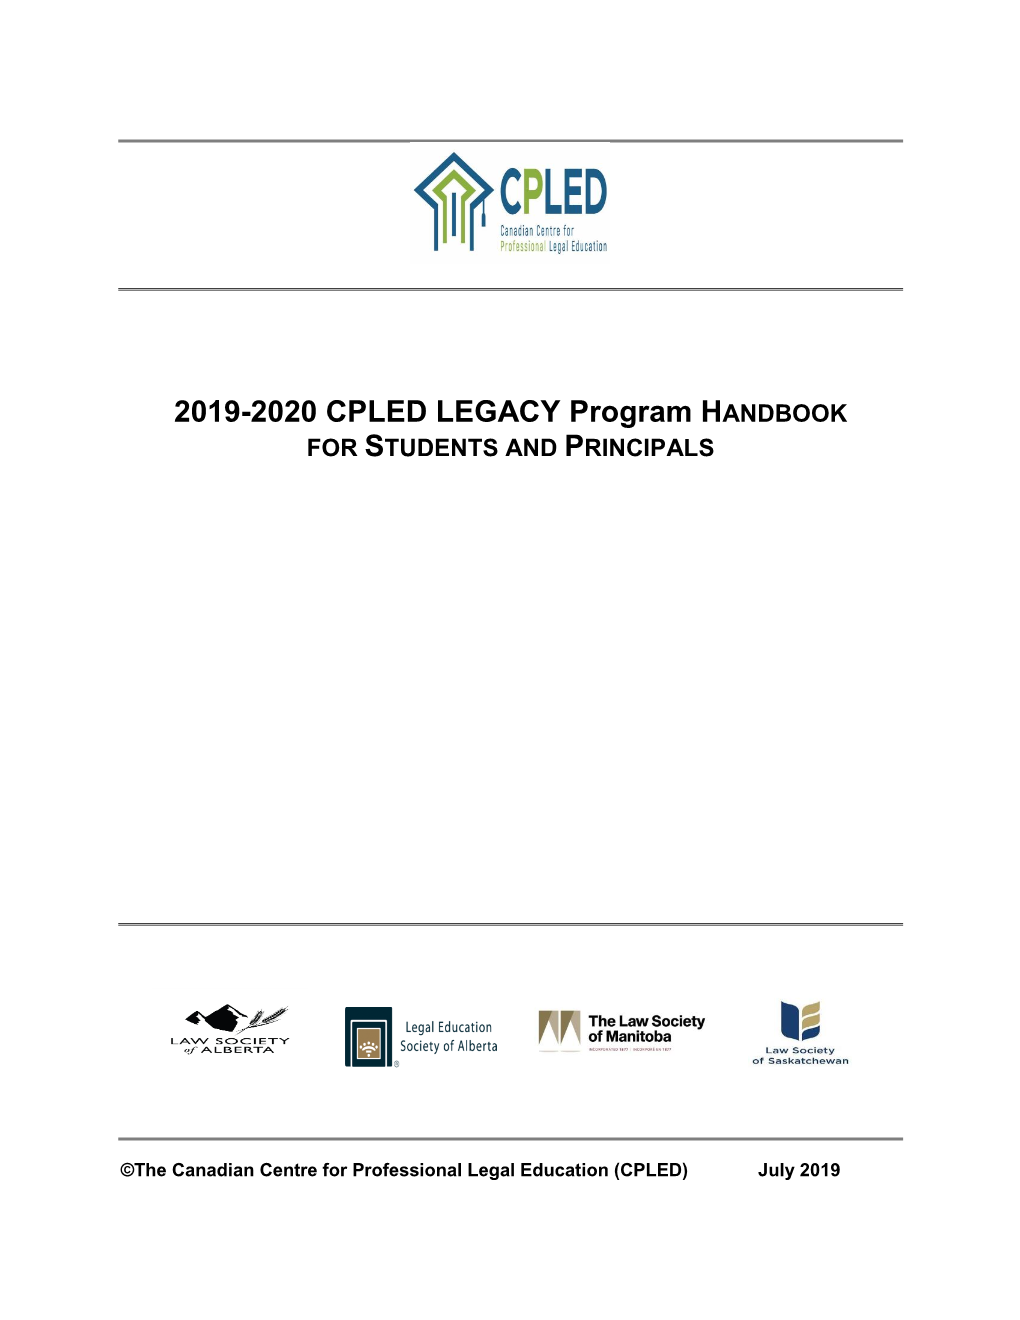 2019-2020 CPLED LEGACY Program HANDBOOK for STUDENTS and PRINCIPALS